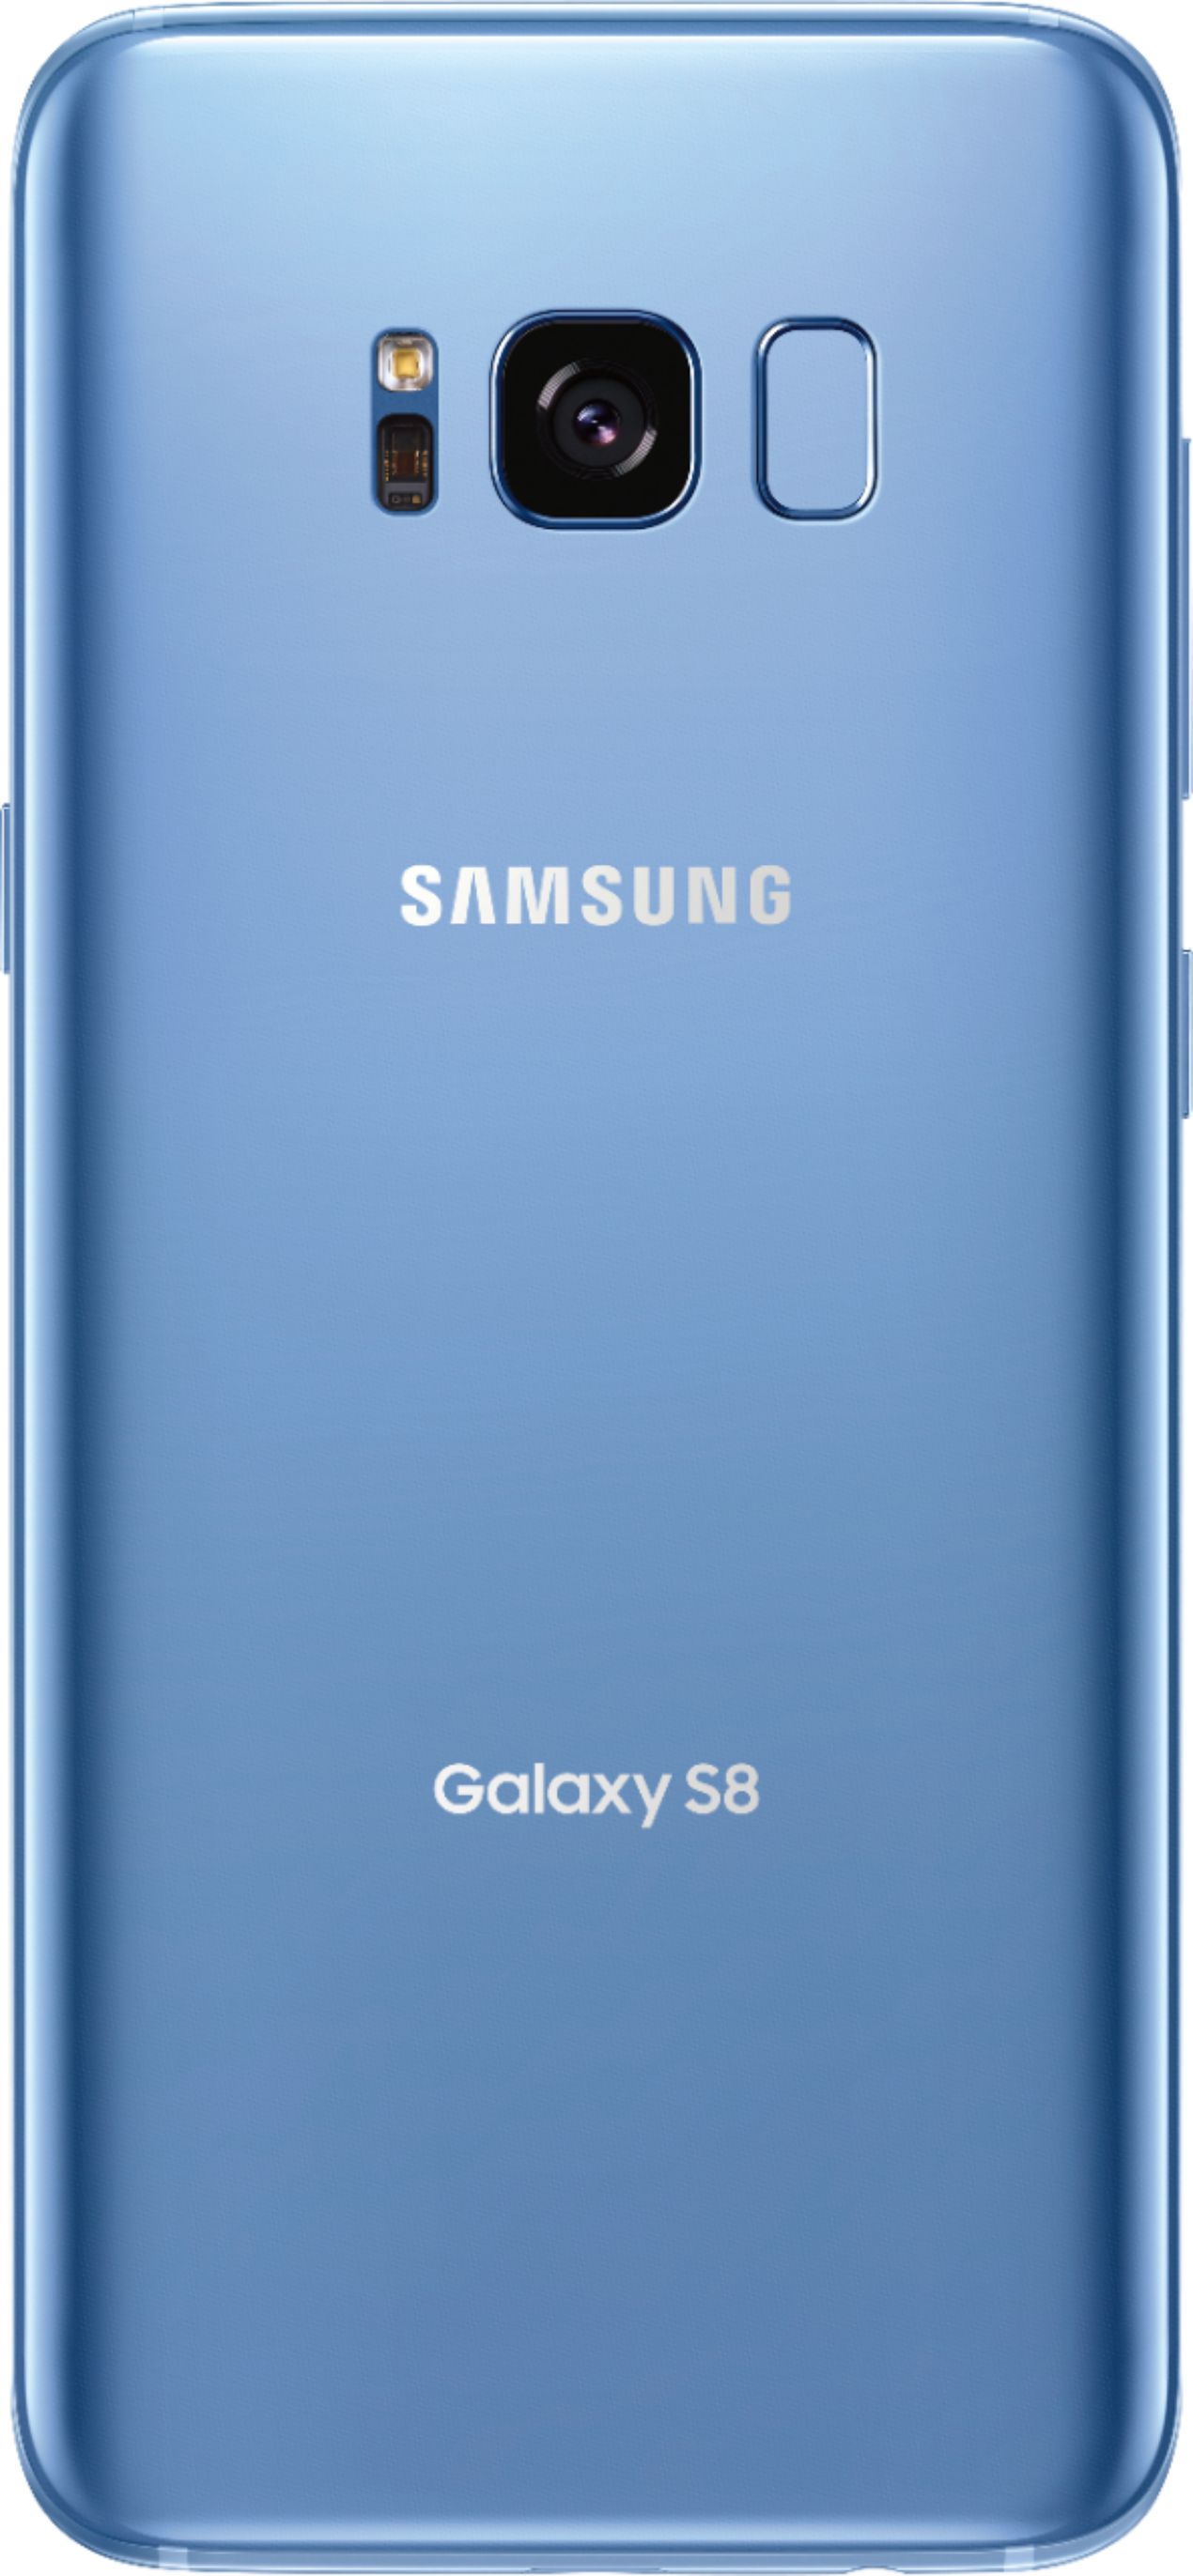 Back View: Samsung - Refurbished Galaxy S8 4G LTE with 64GB Memory Cell Phone (Unlocked) - Coral Blue